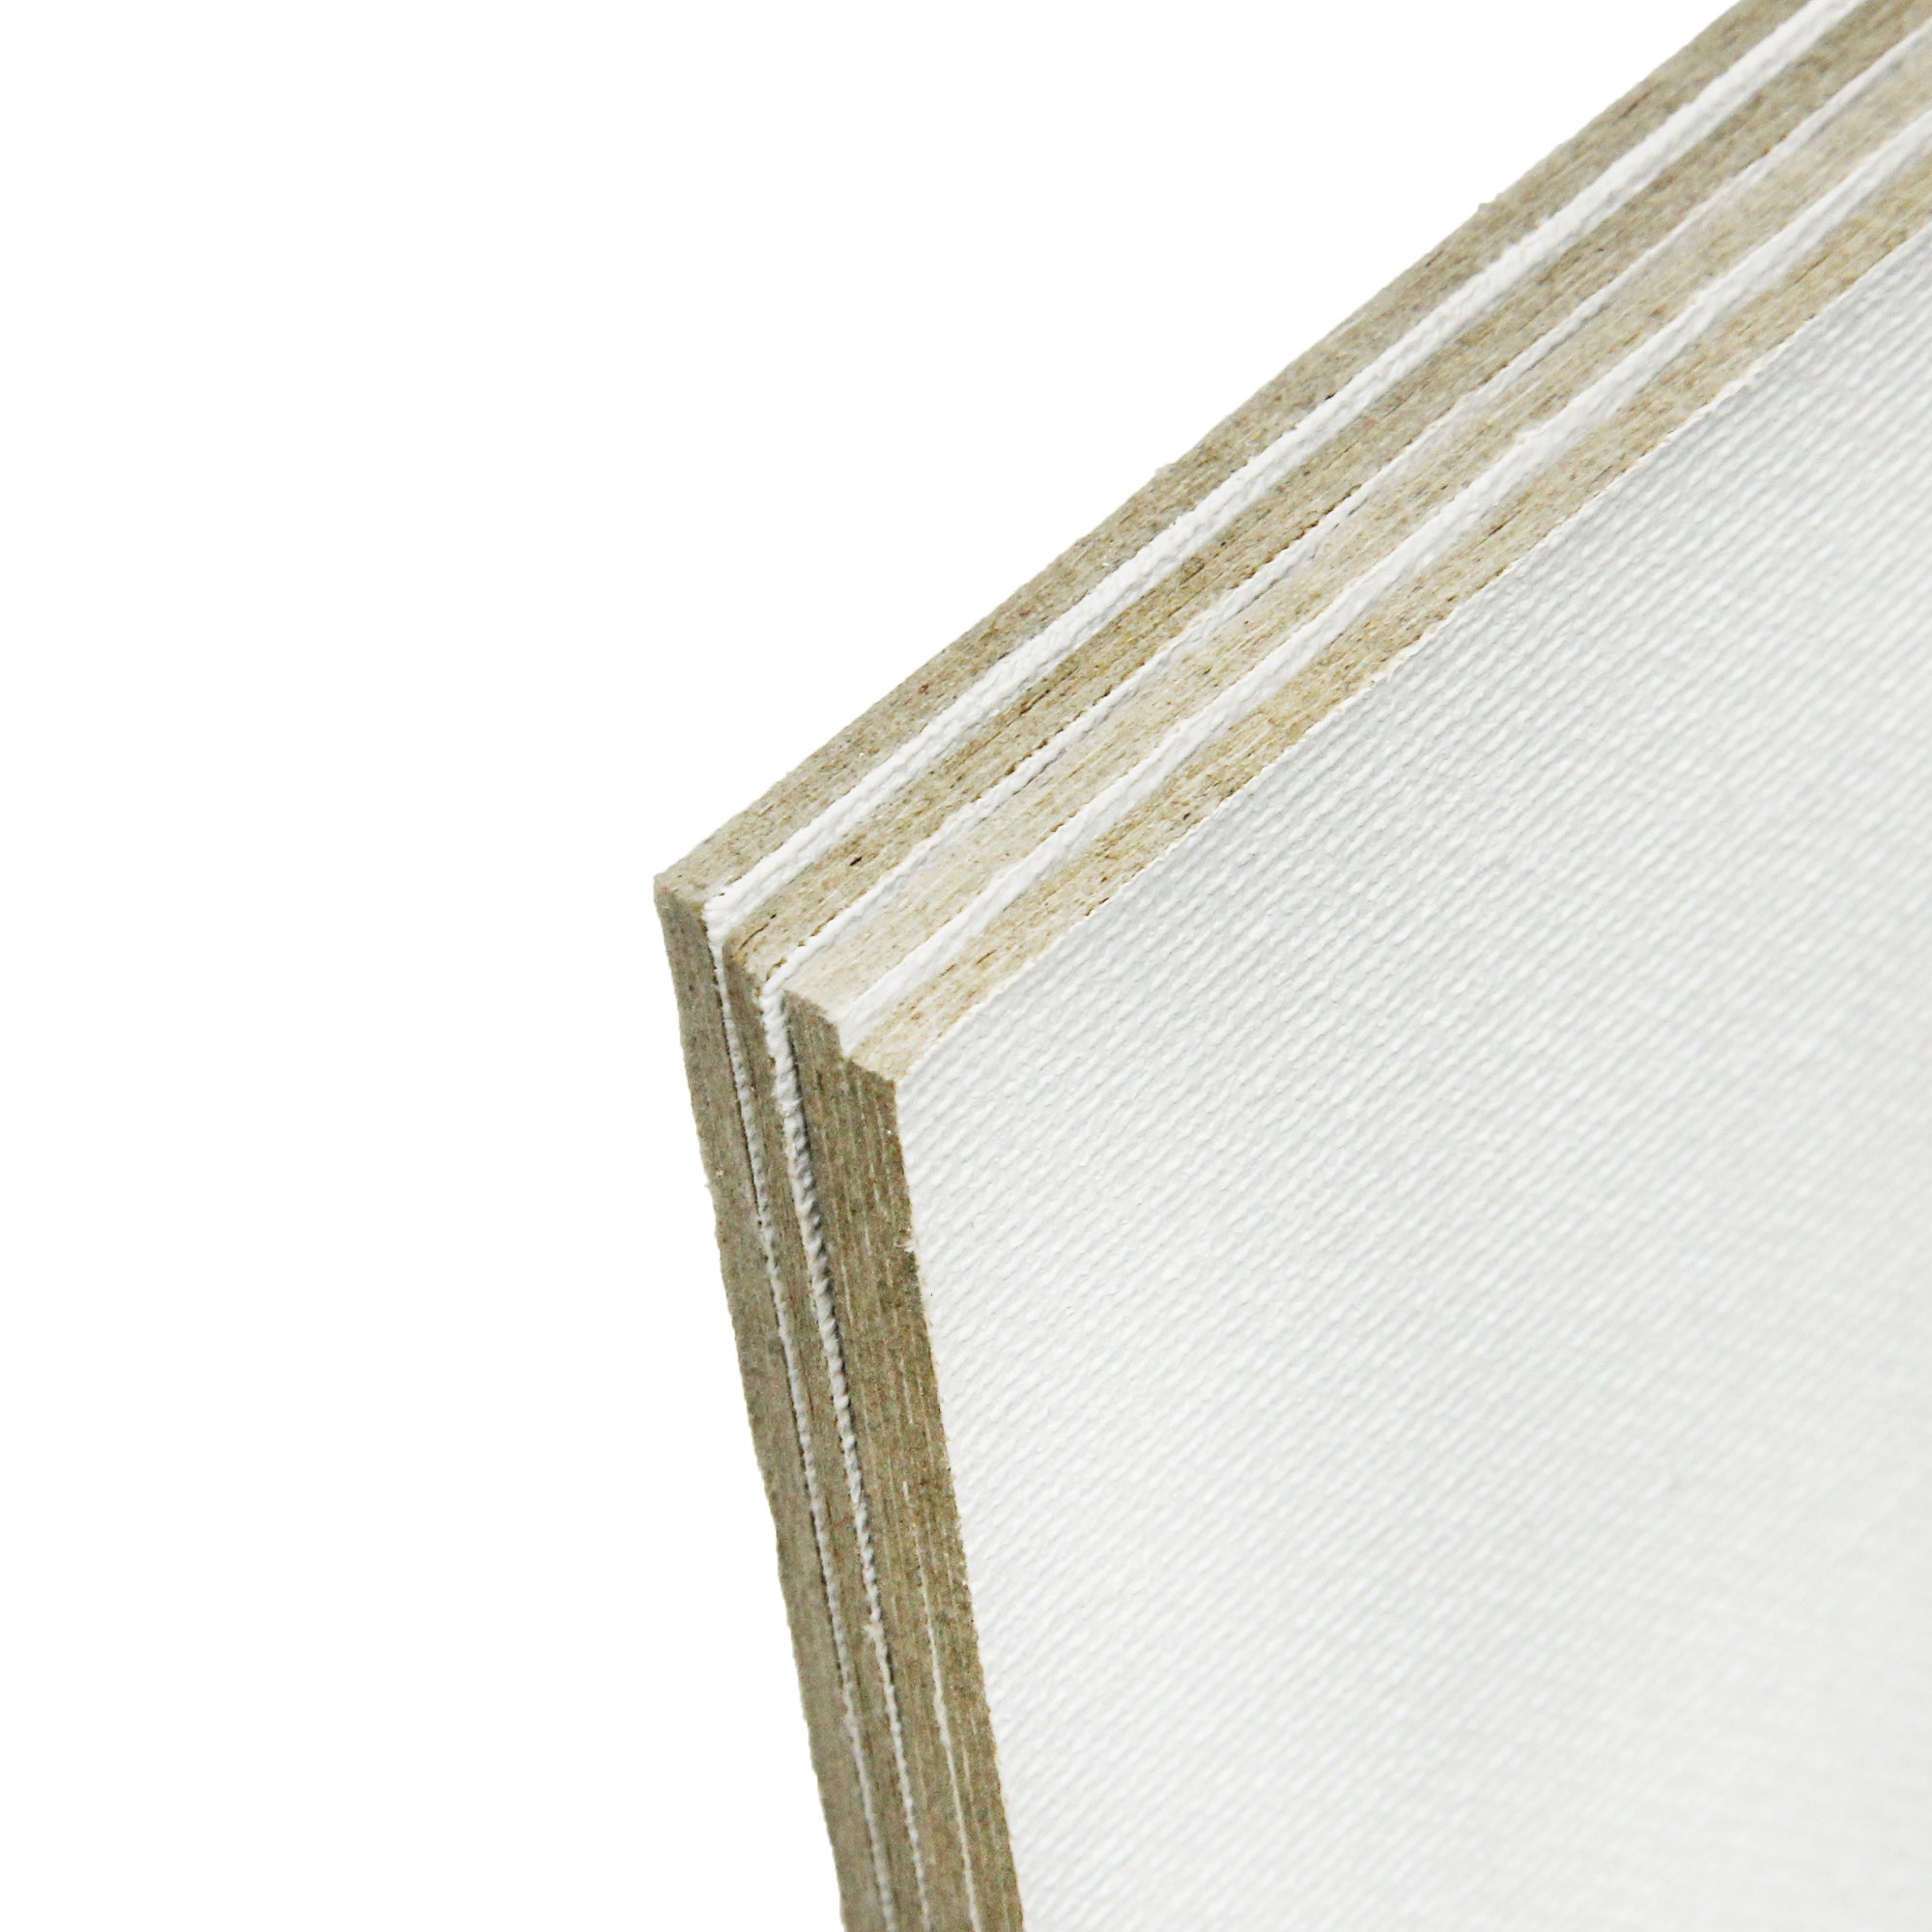 Canvas Board Rectangle 12 X 10Inch 230Gsm 2Mm Thick 4Pc Shrink Lb